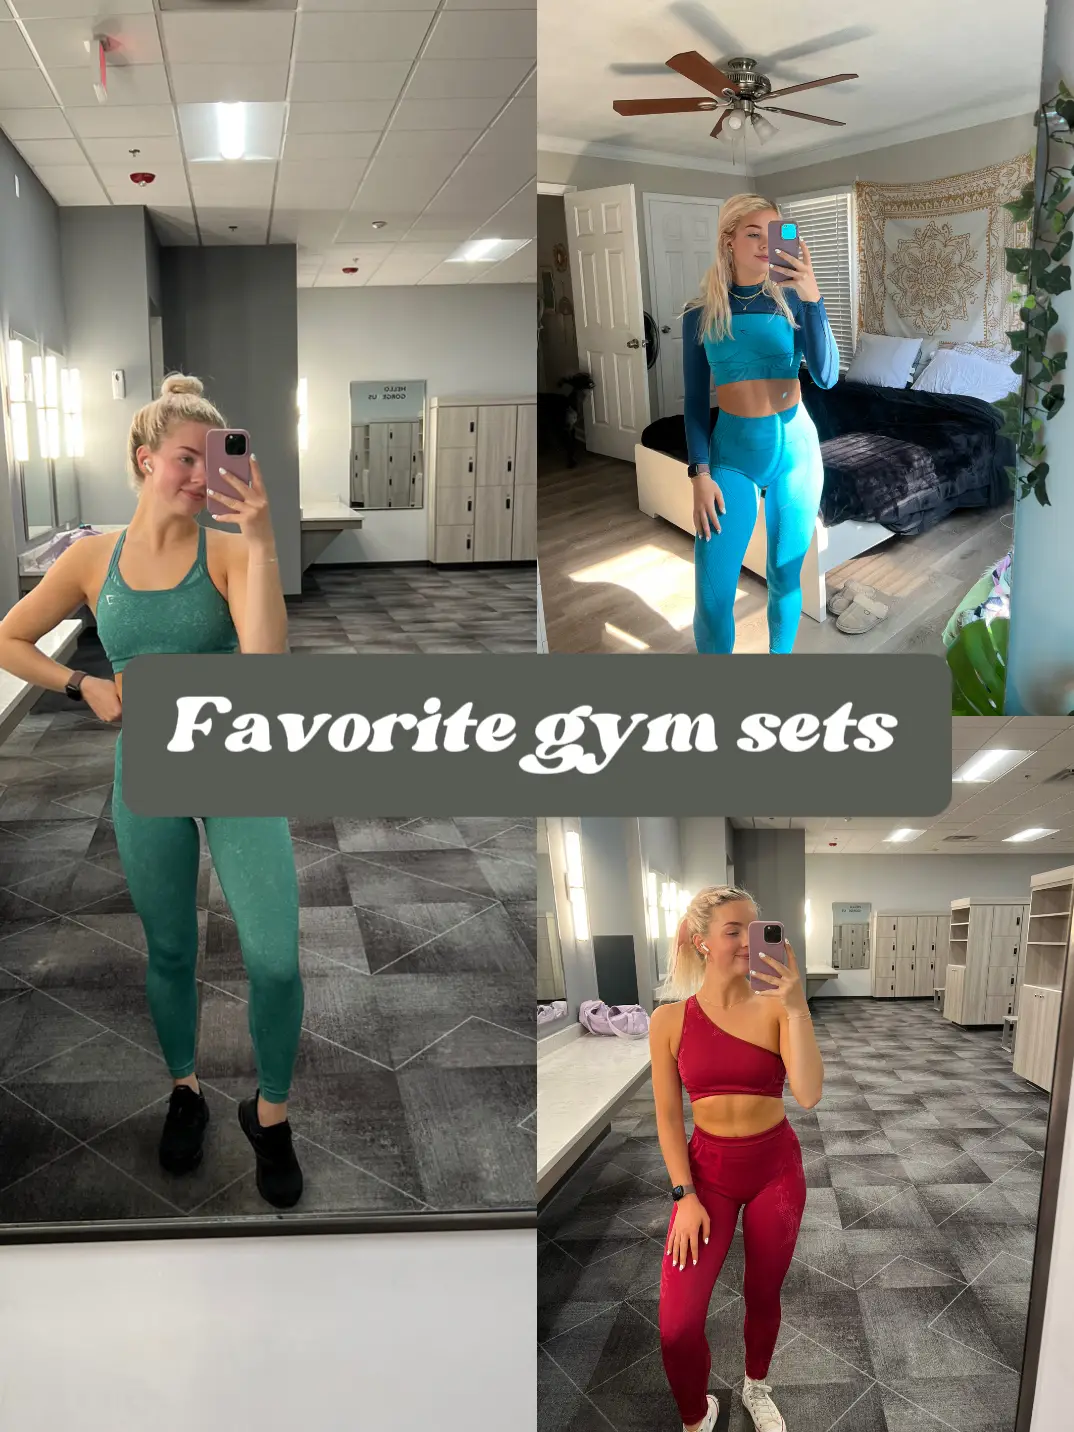 My current favorite gym sets from Gymshark, Gallery posted by Kallee K